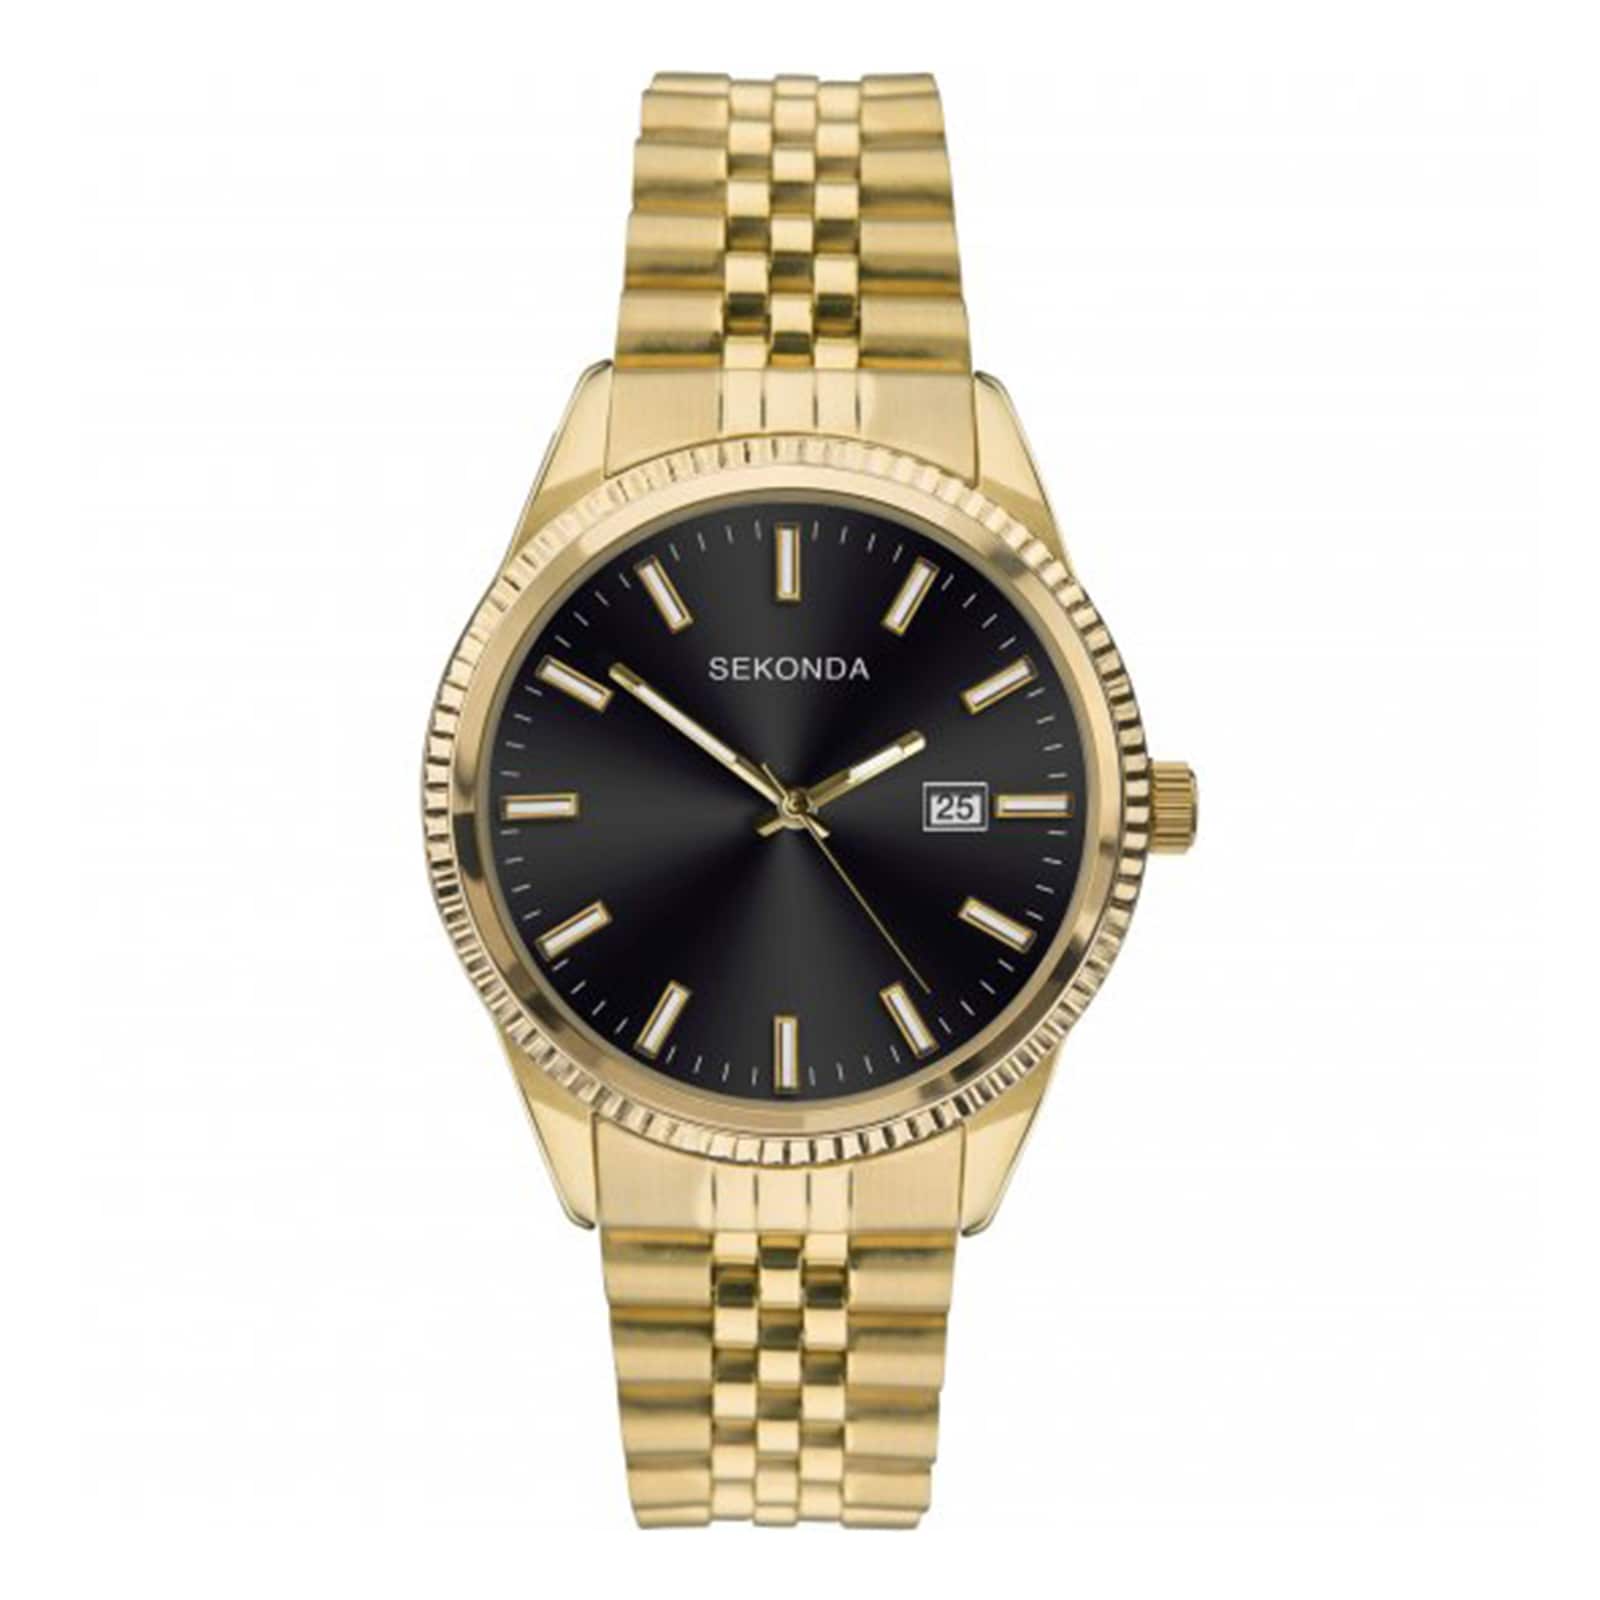 King 40mm Mens Watch Black Gold Plated